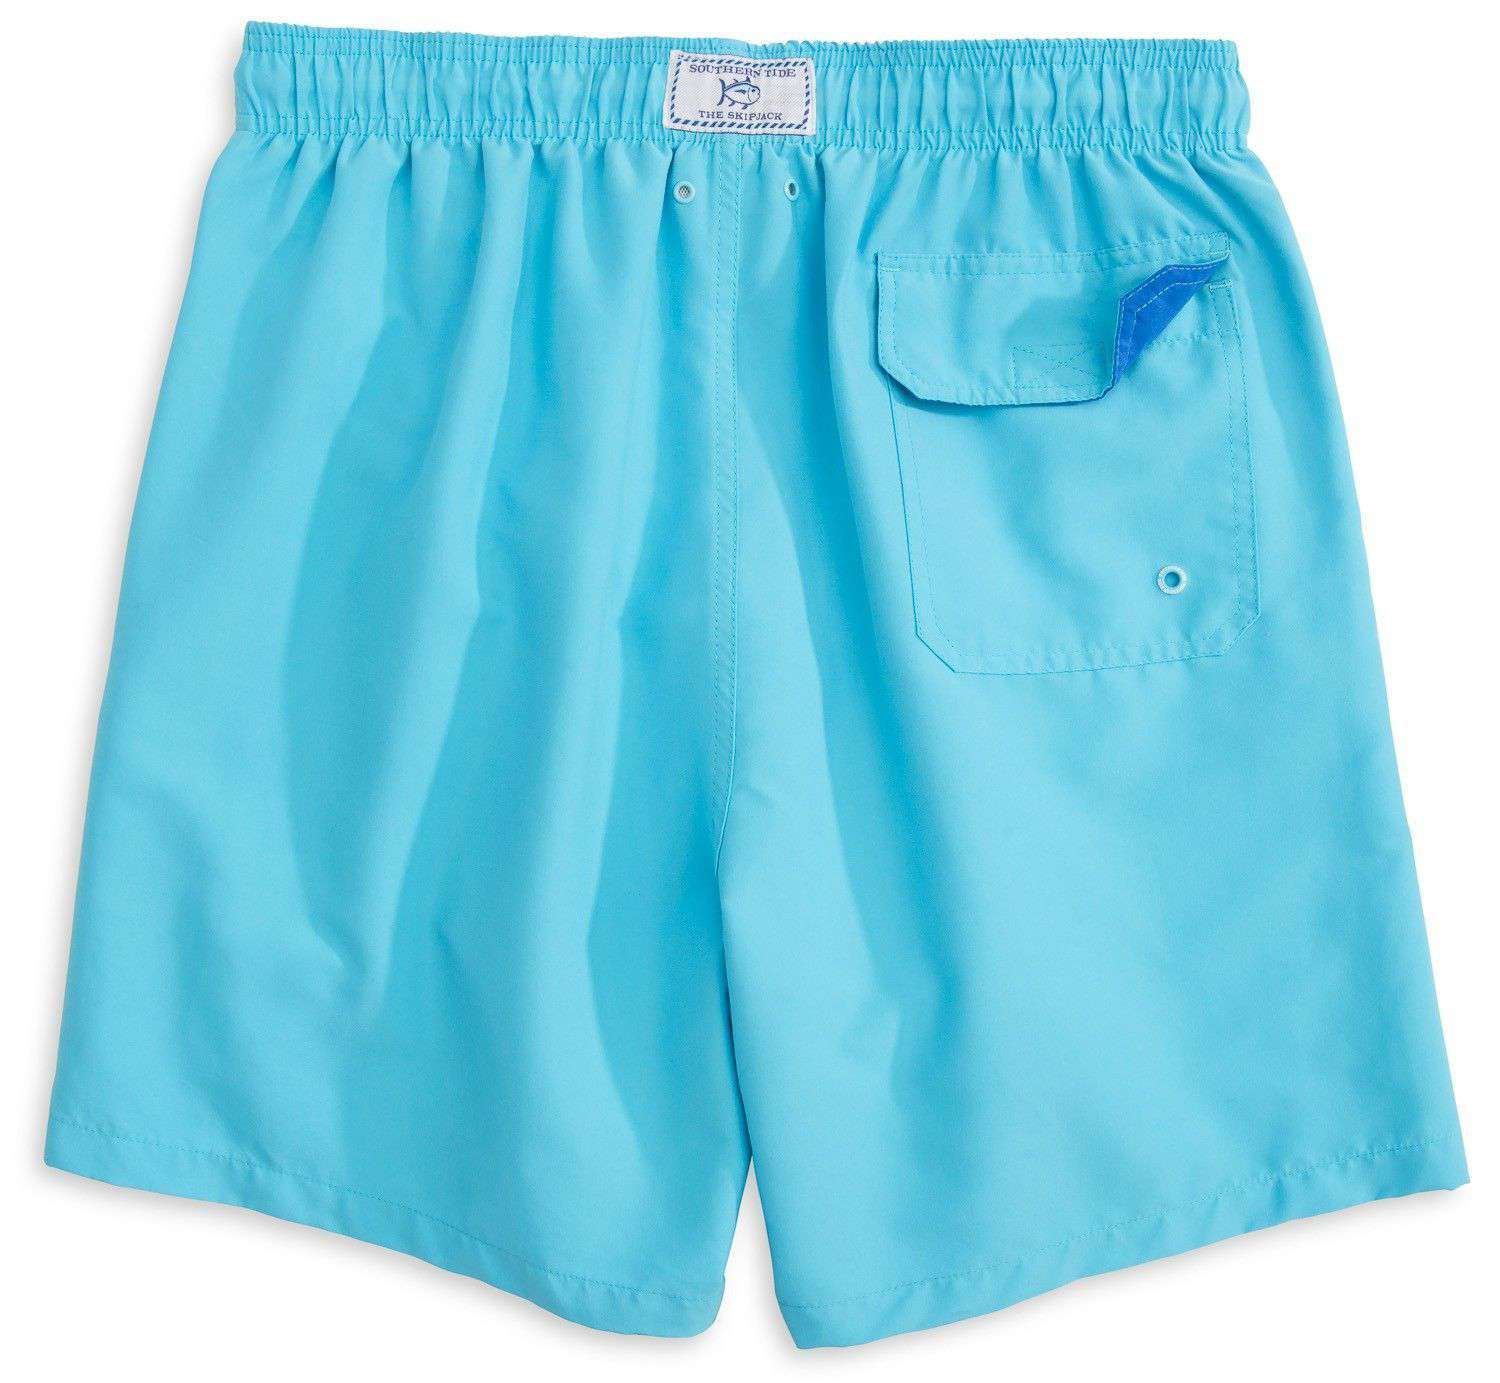 Southern Tide Solid Swim Trunks in Turquoise Blue